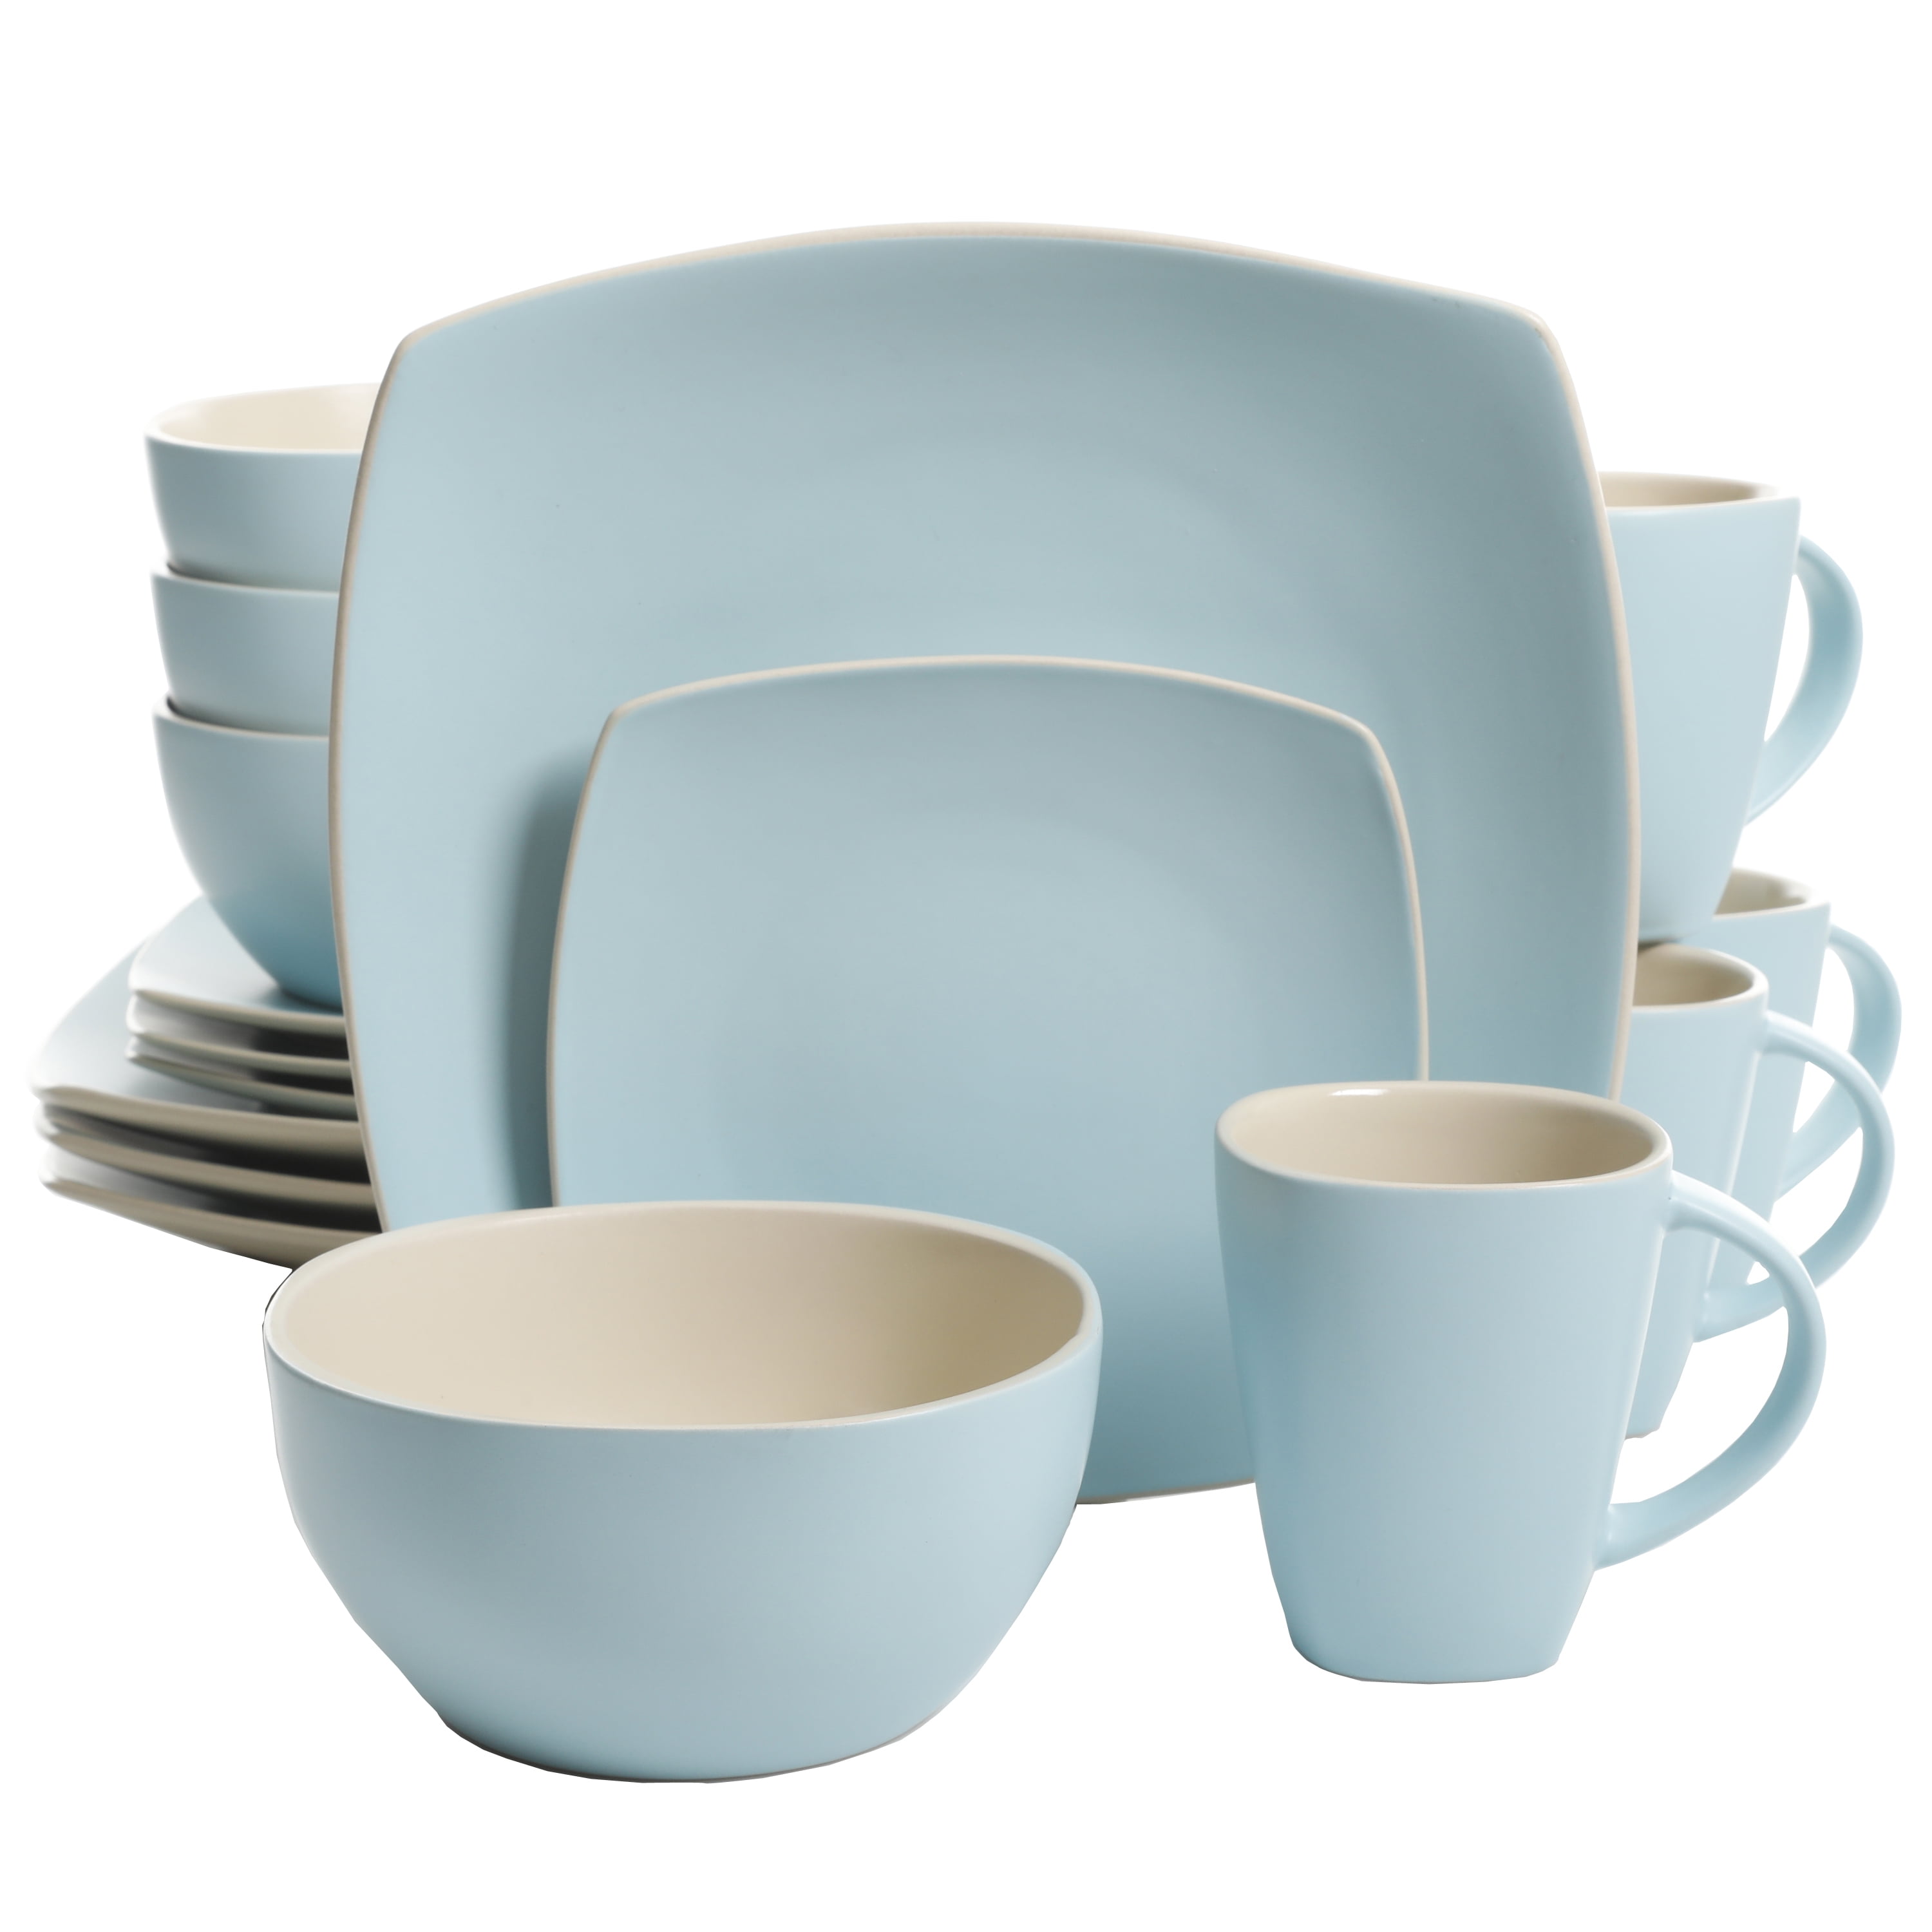 Details about   Gibson Home Soho Lounge Square Stoneware 16-piece Dinnerware Set 